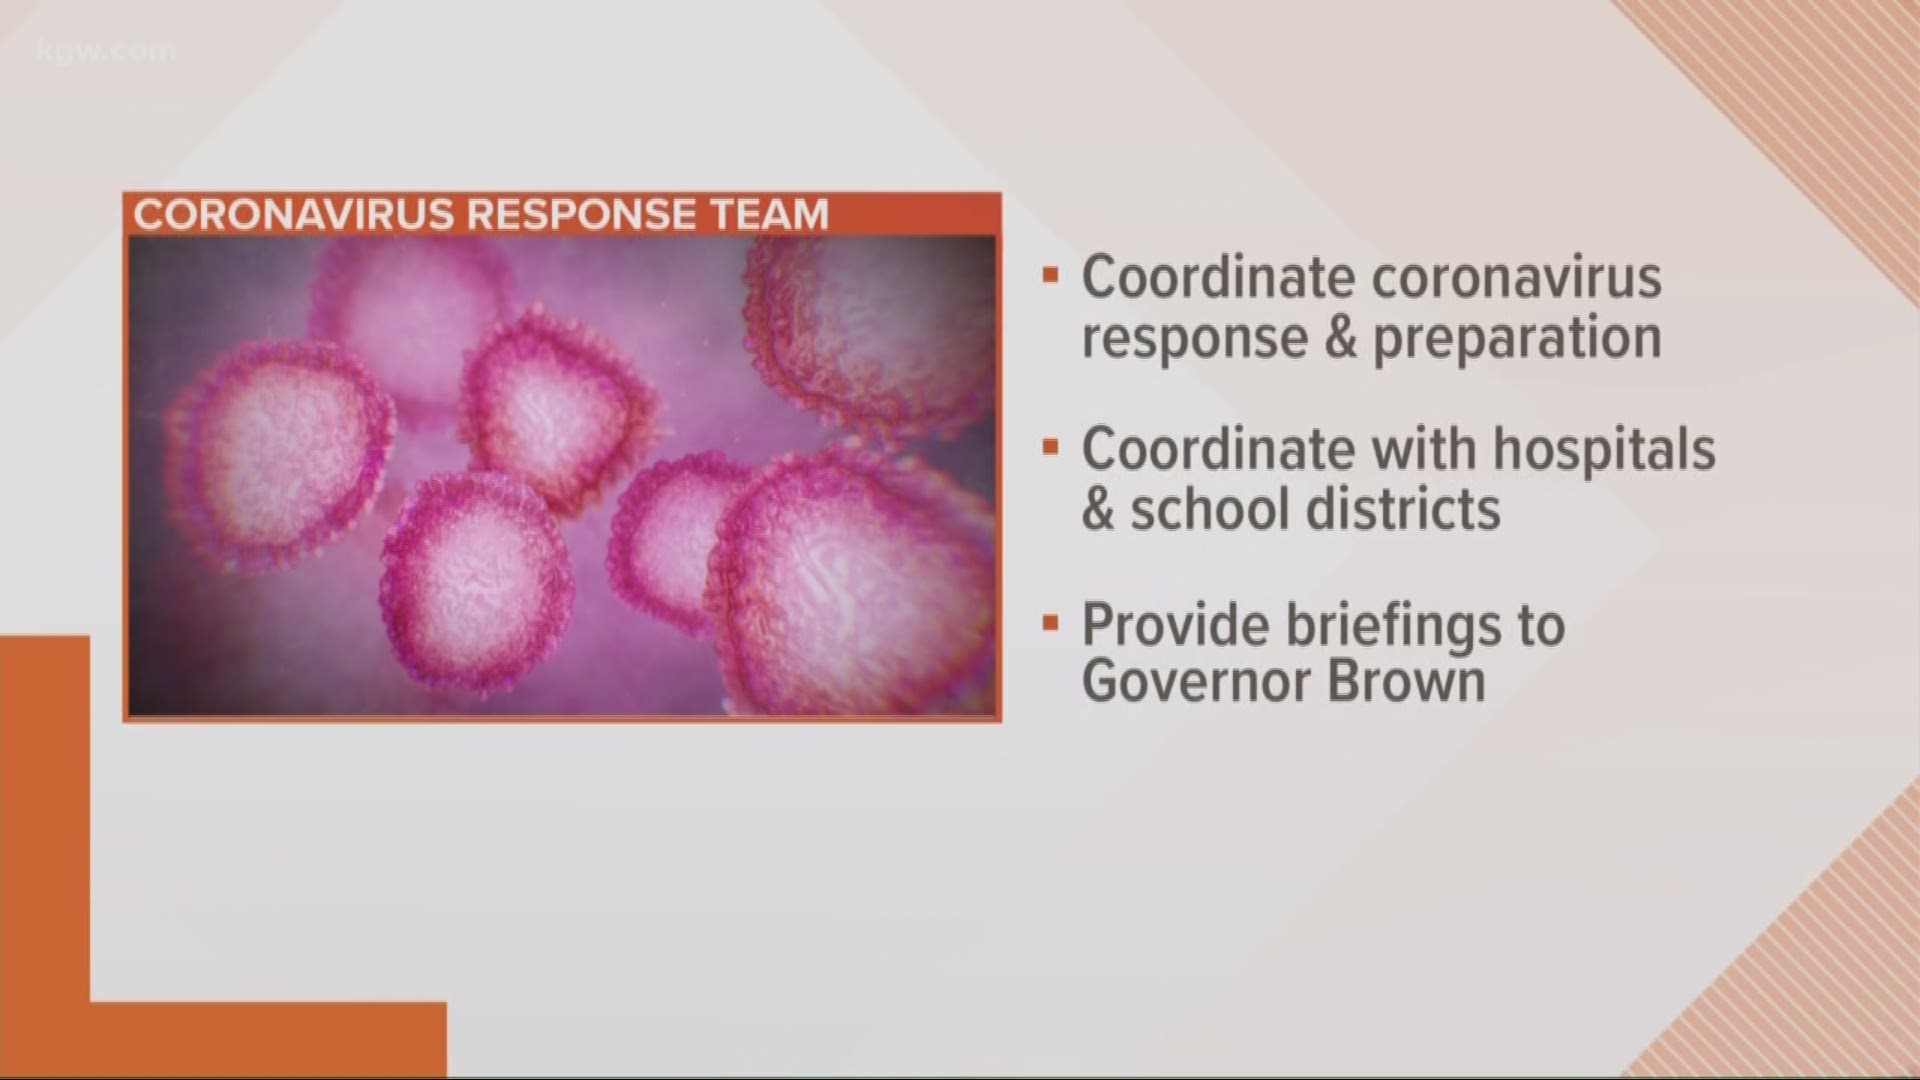 The team will coordinate preparation and response in Oregon.